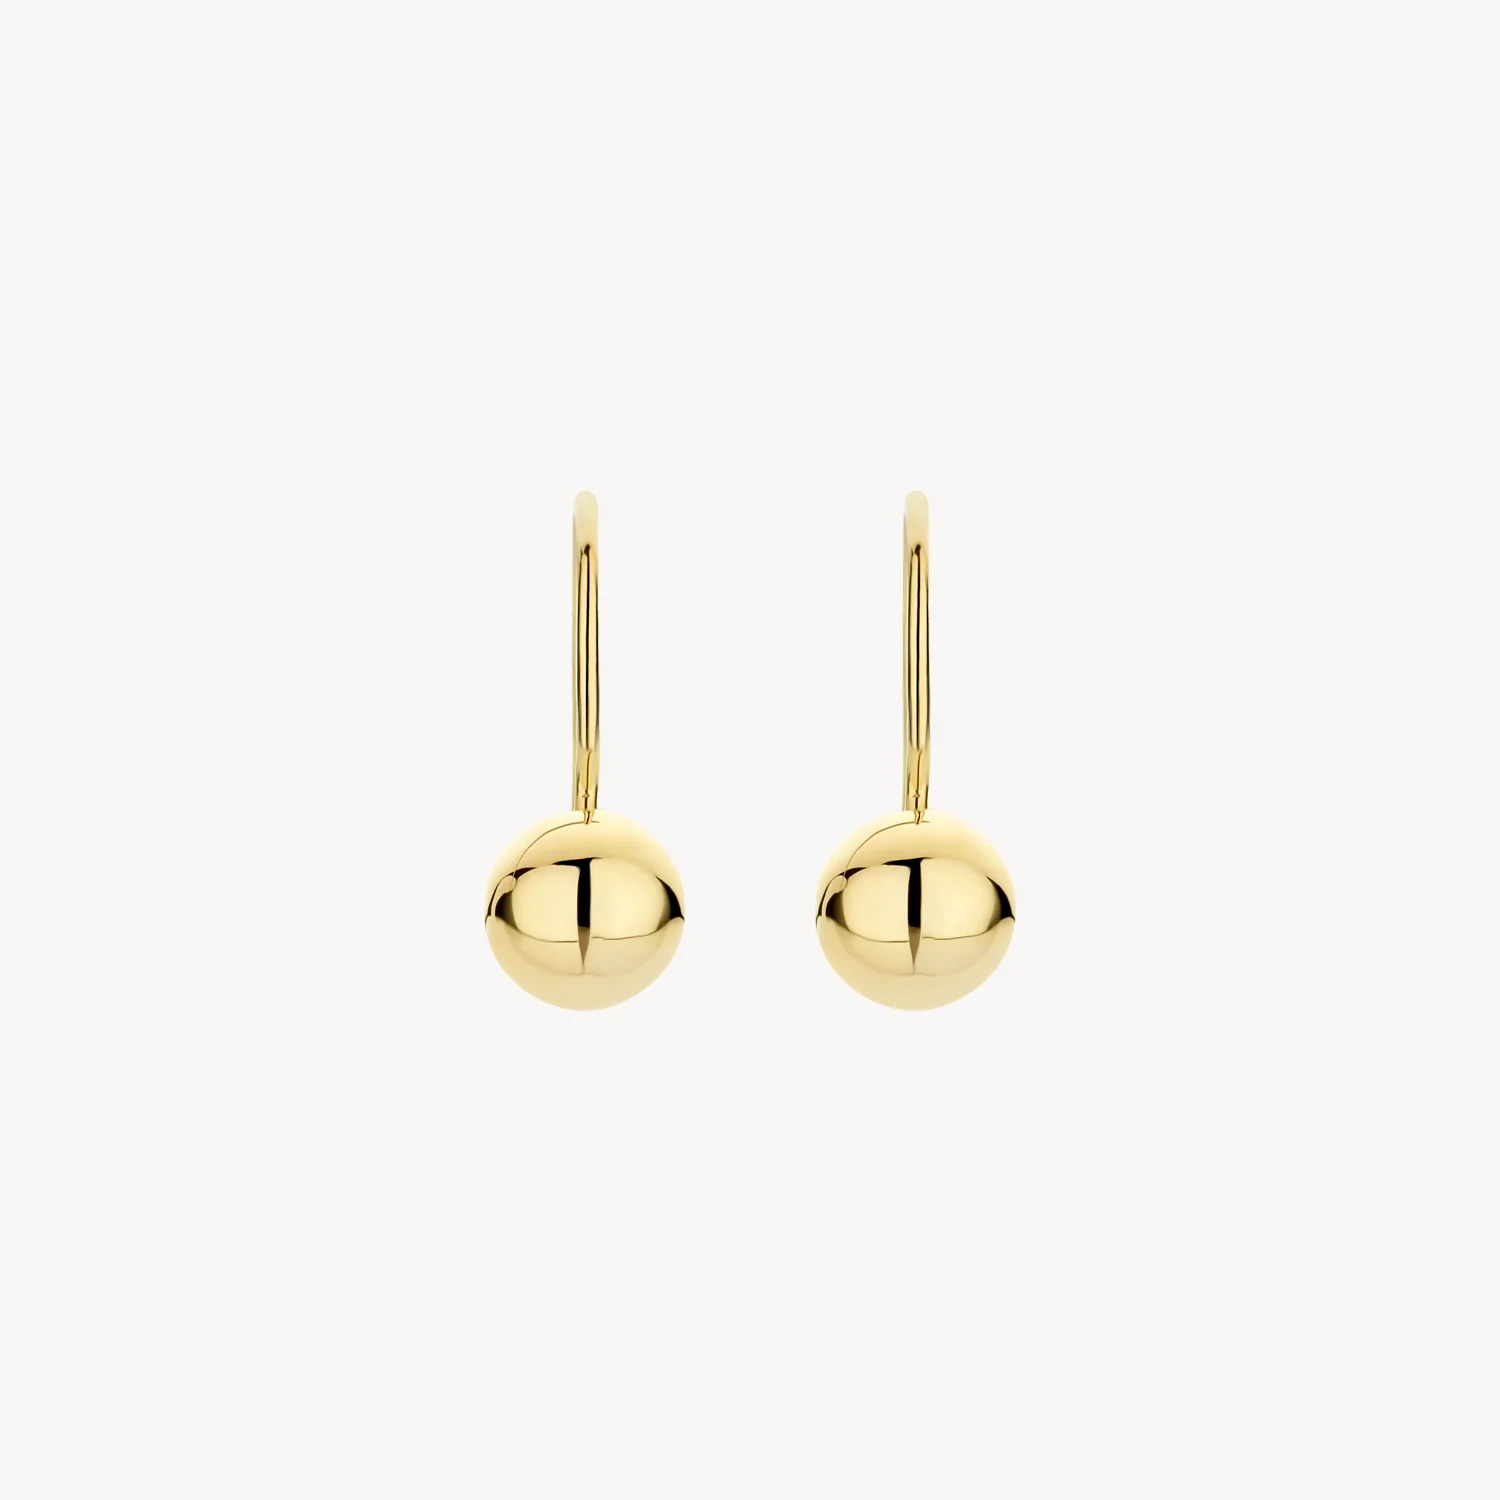 Blush Yellow Gold Ball Drop Wire Hook Earrings - Small